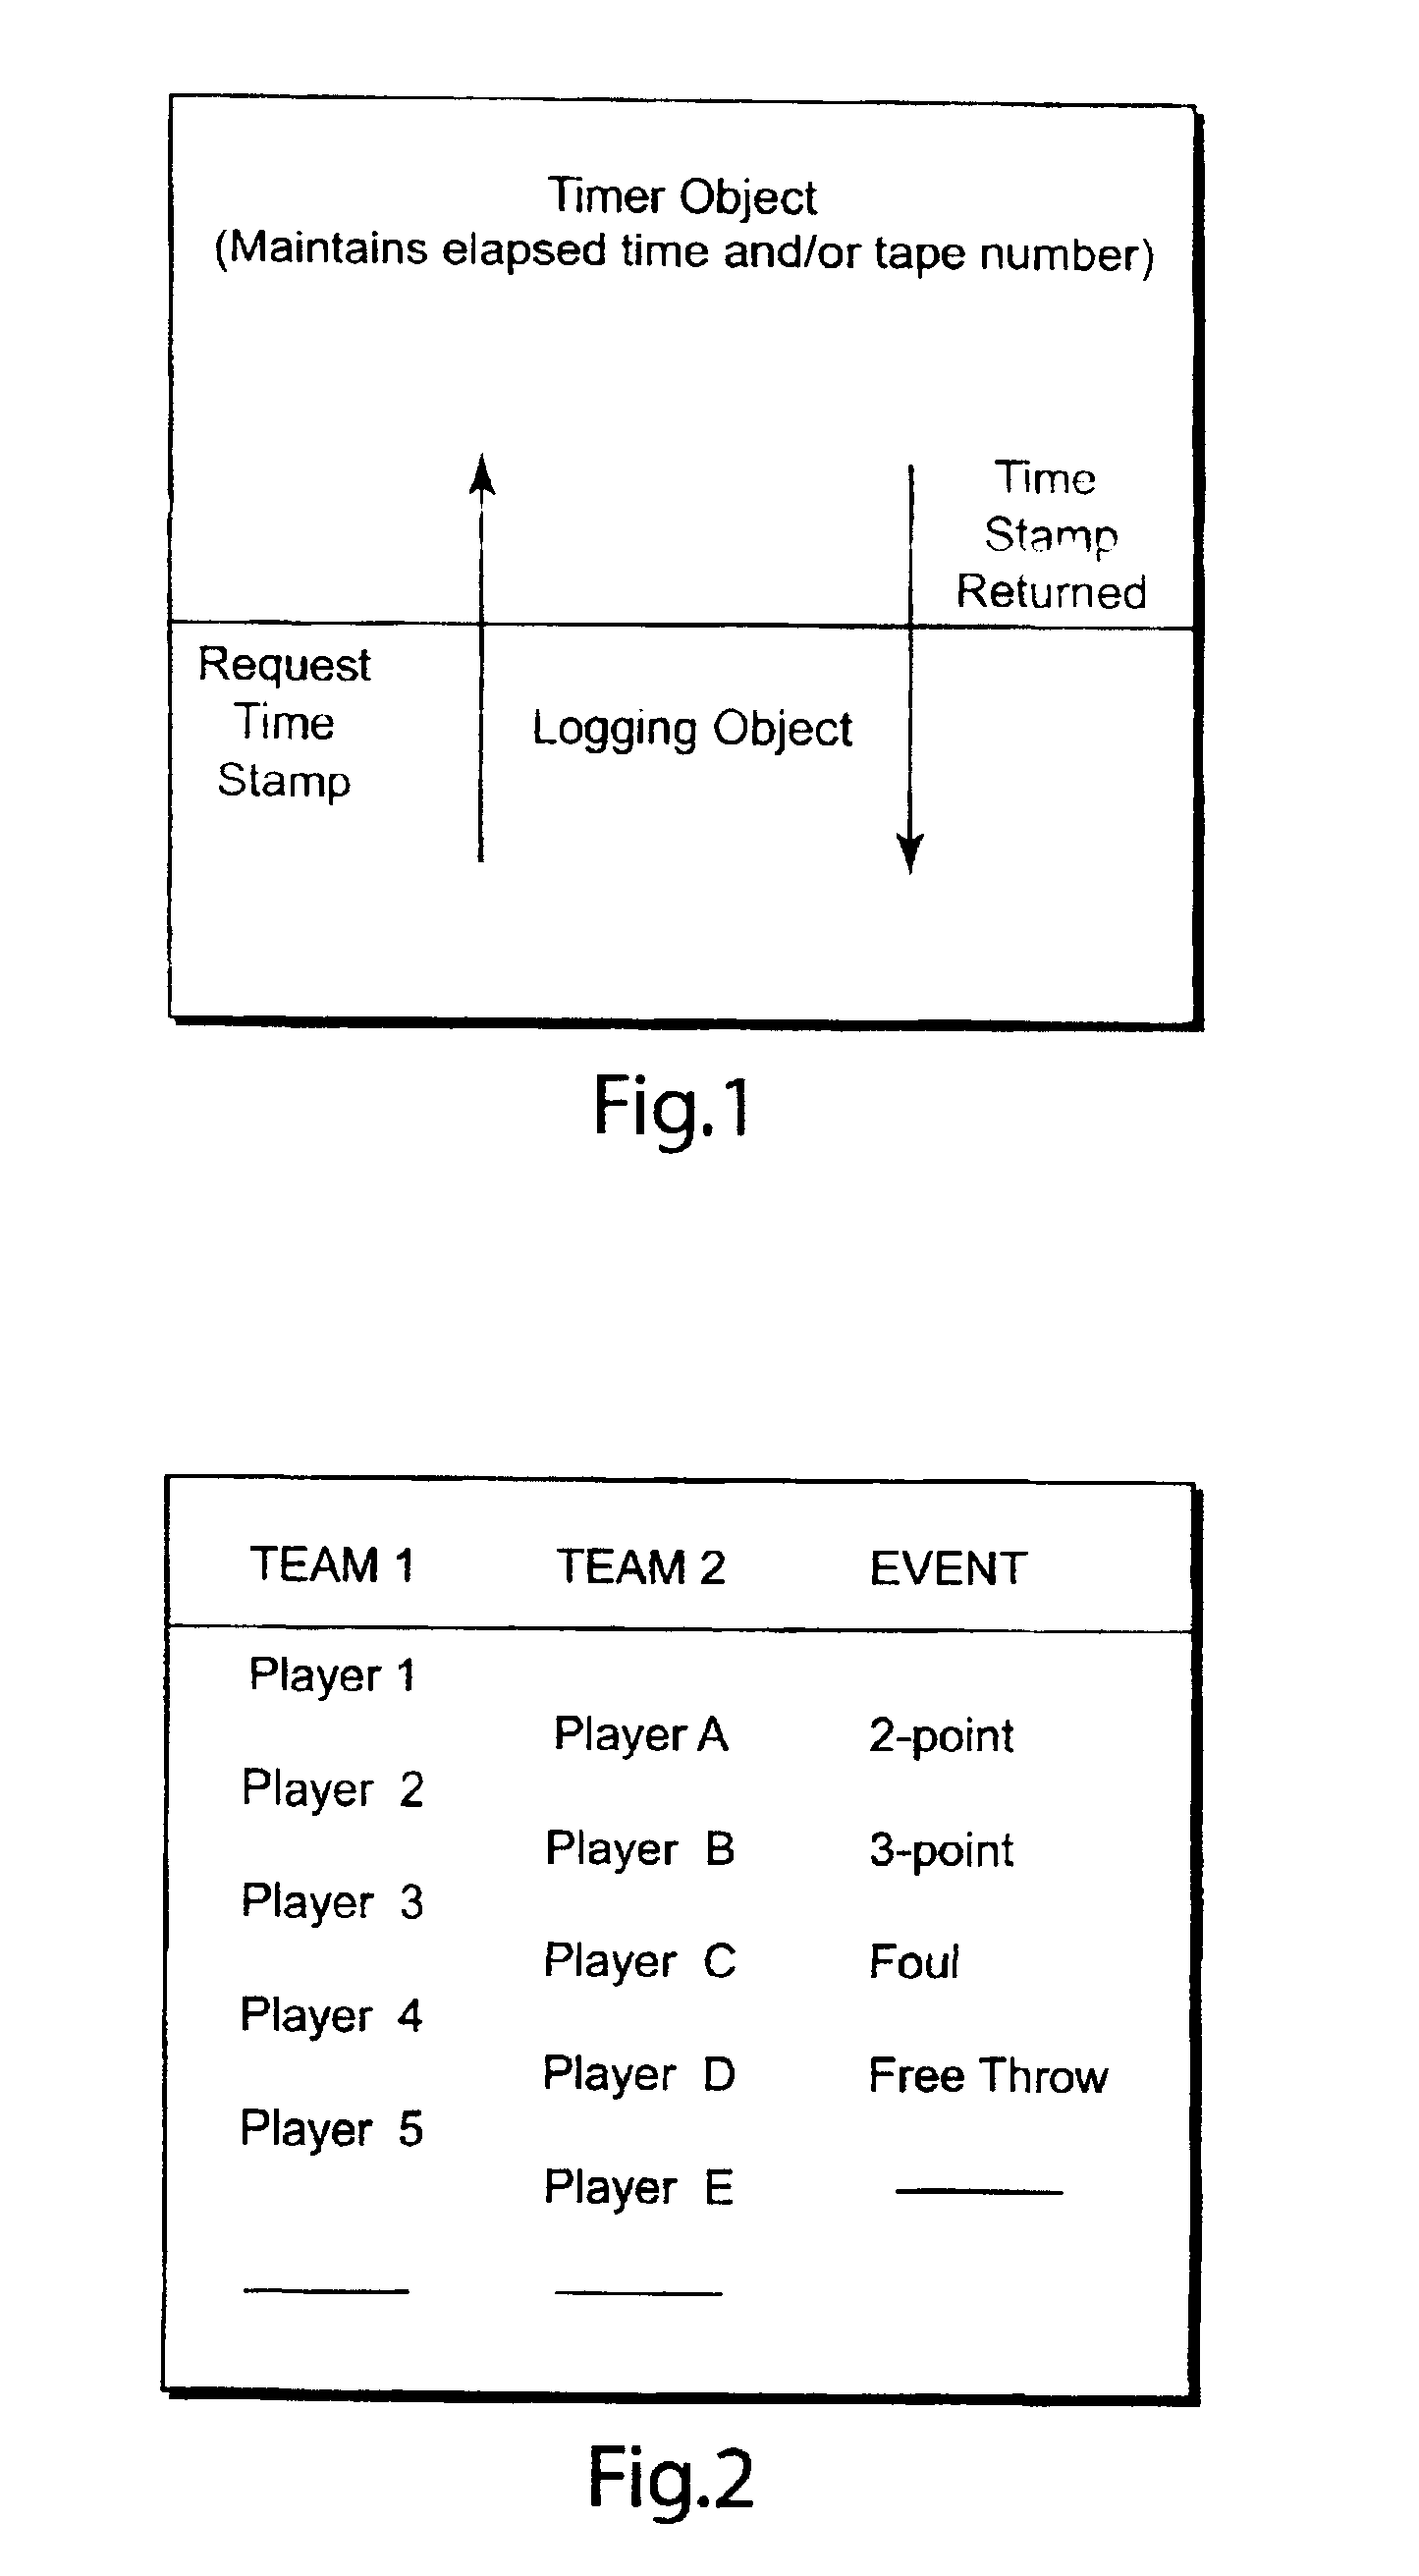 System and method for computer-assisted manual and automatic logging of time-based media